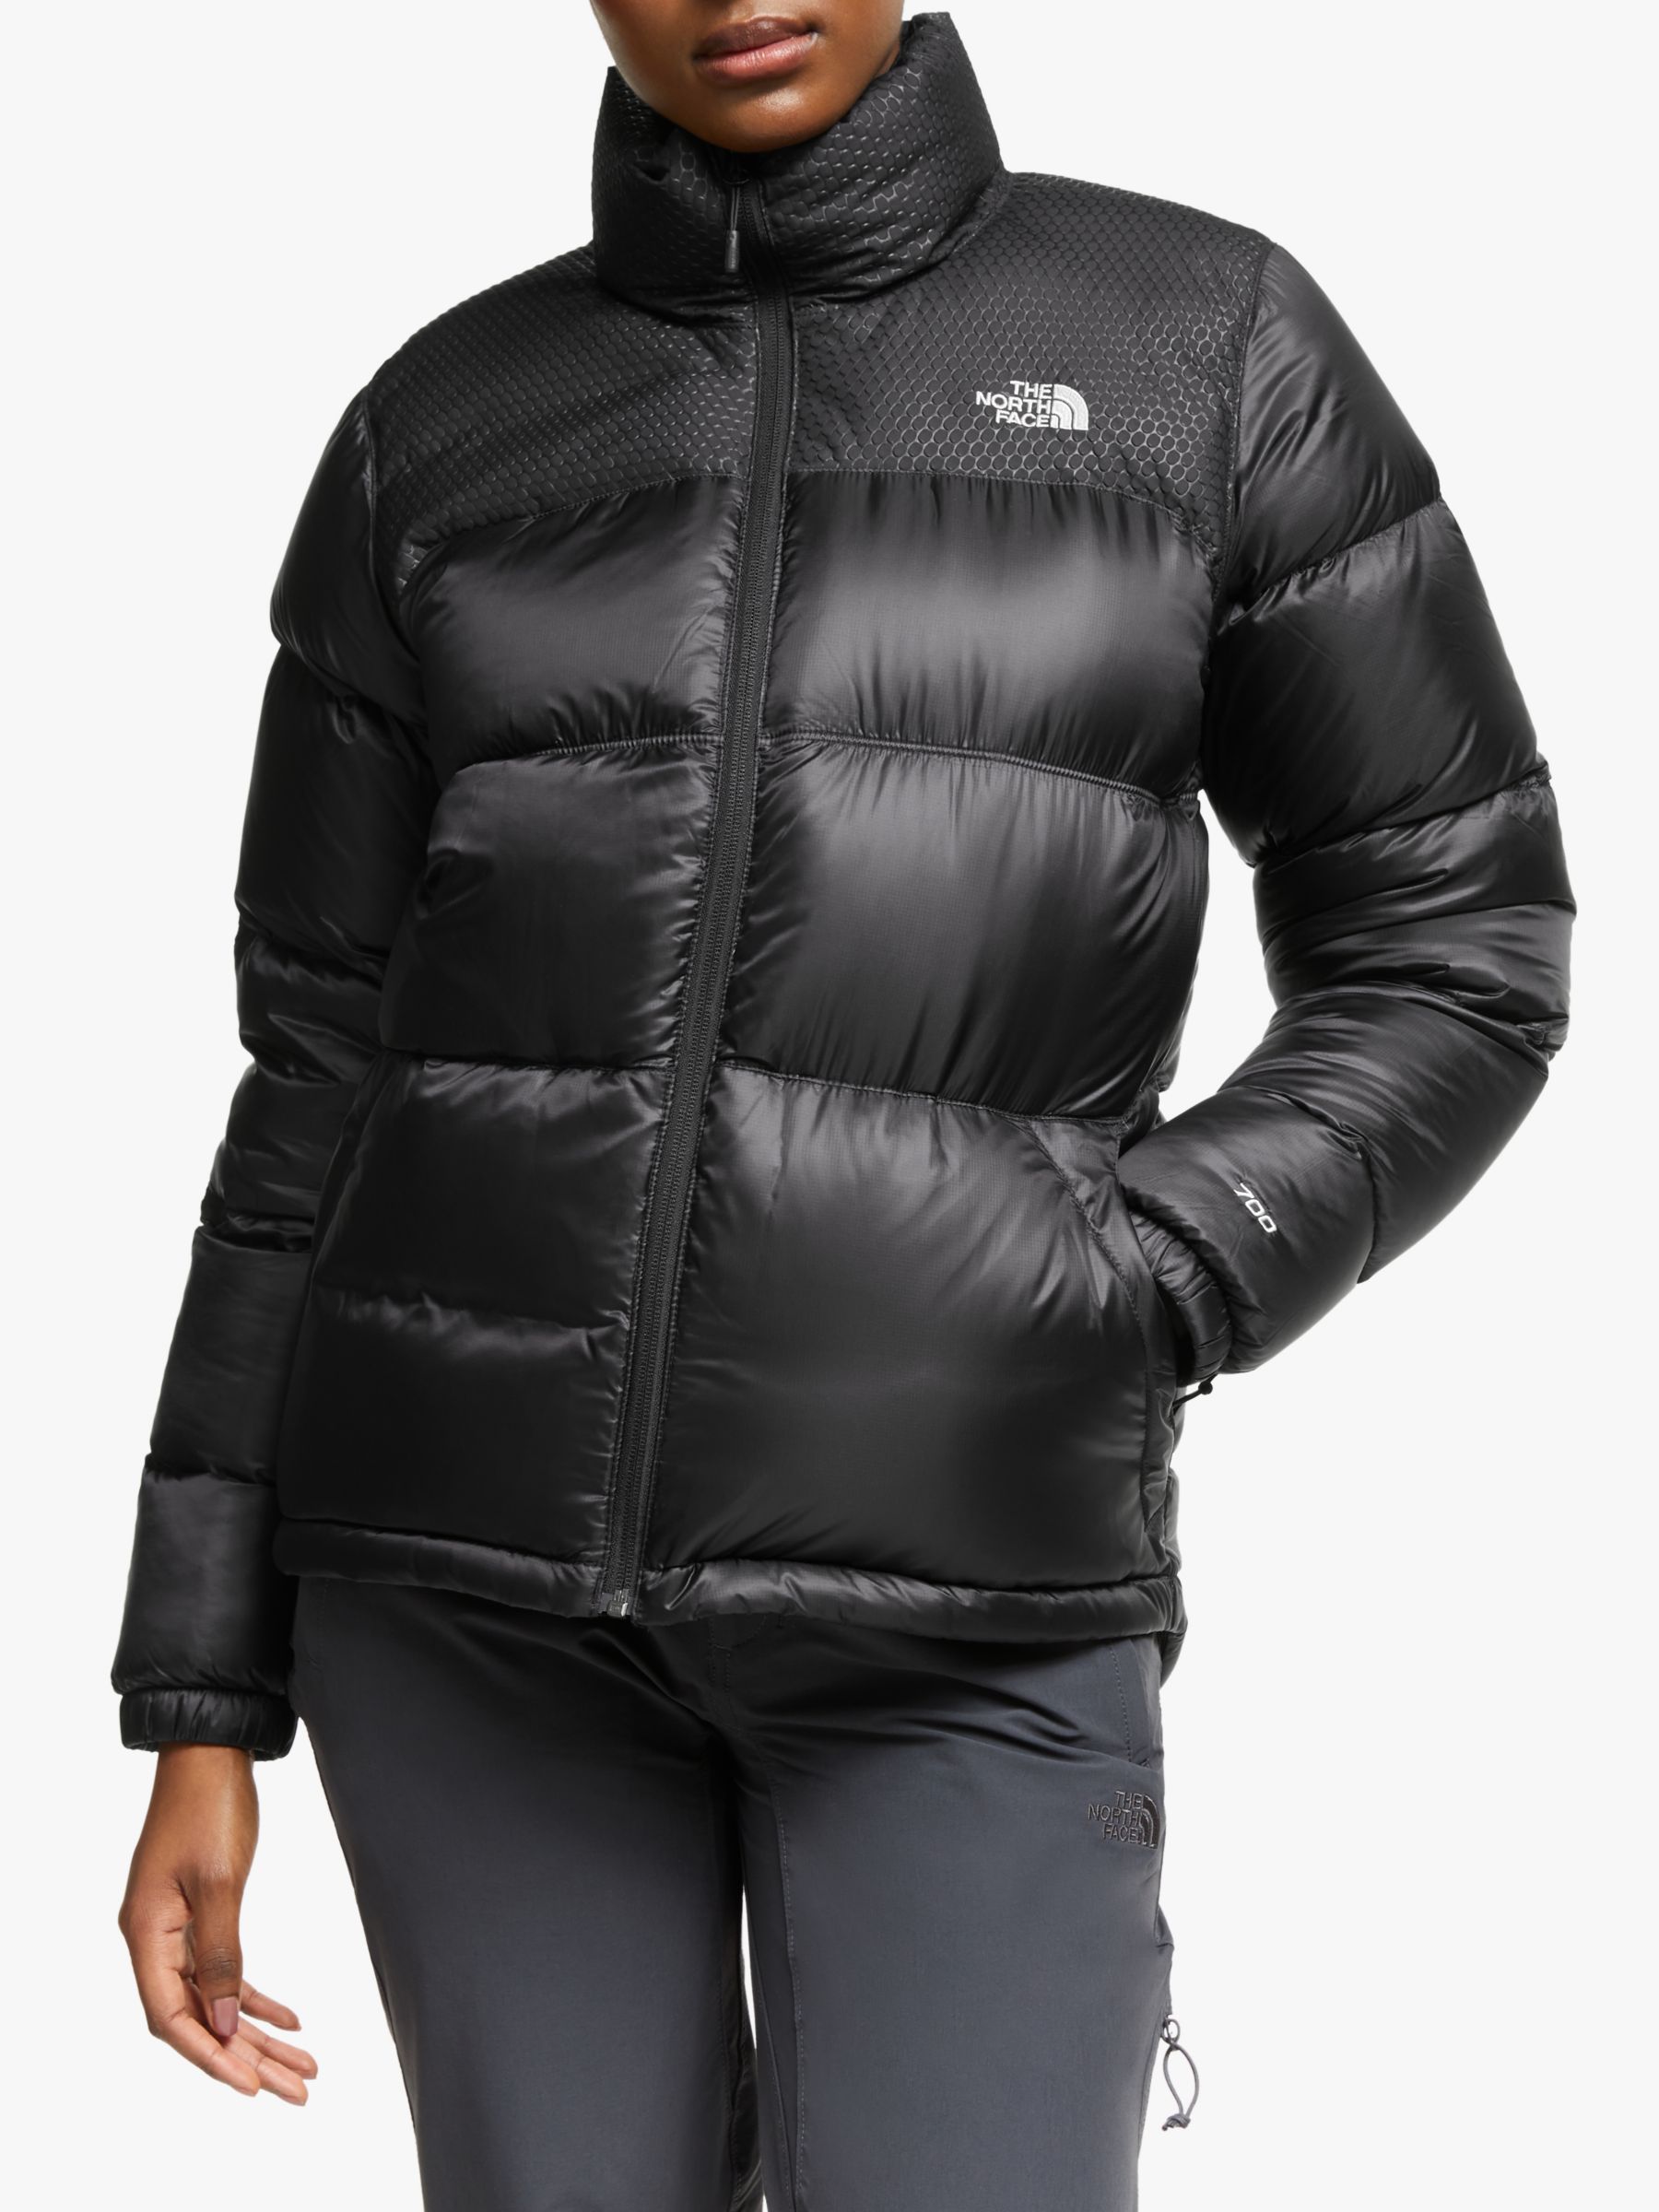 north face thin puffer jacket